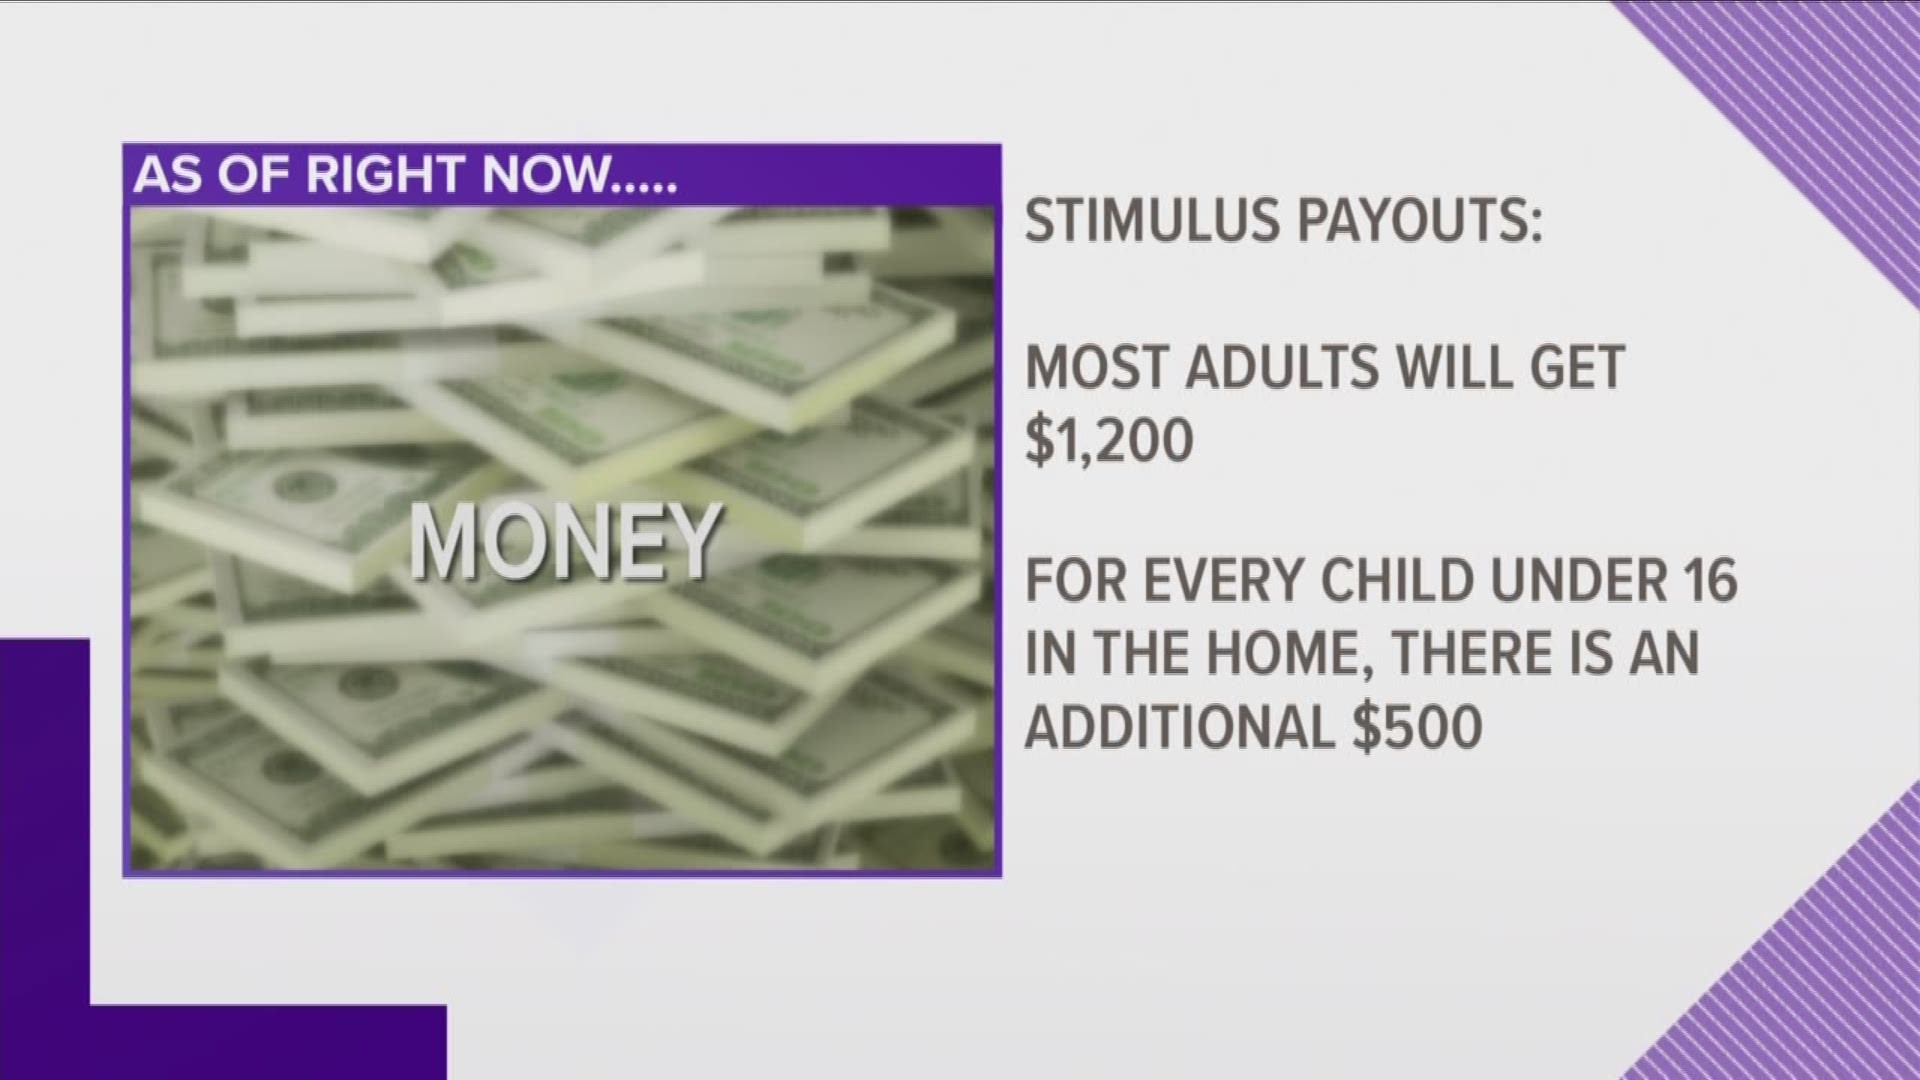 If you're retired or on social security will you get a stimulus check? Here's what we found out!